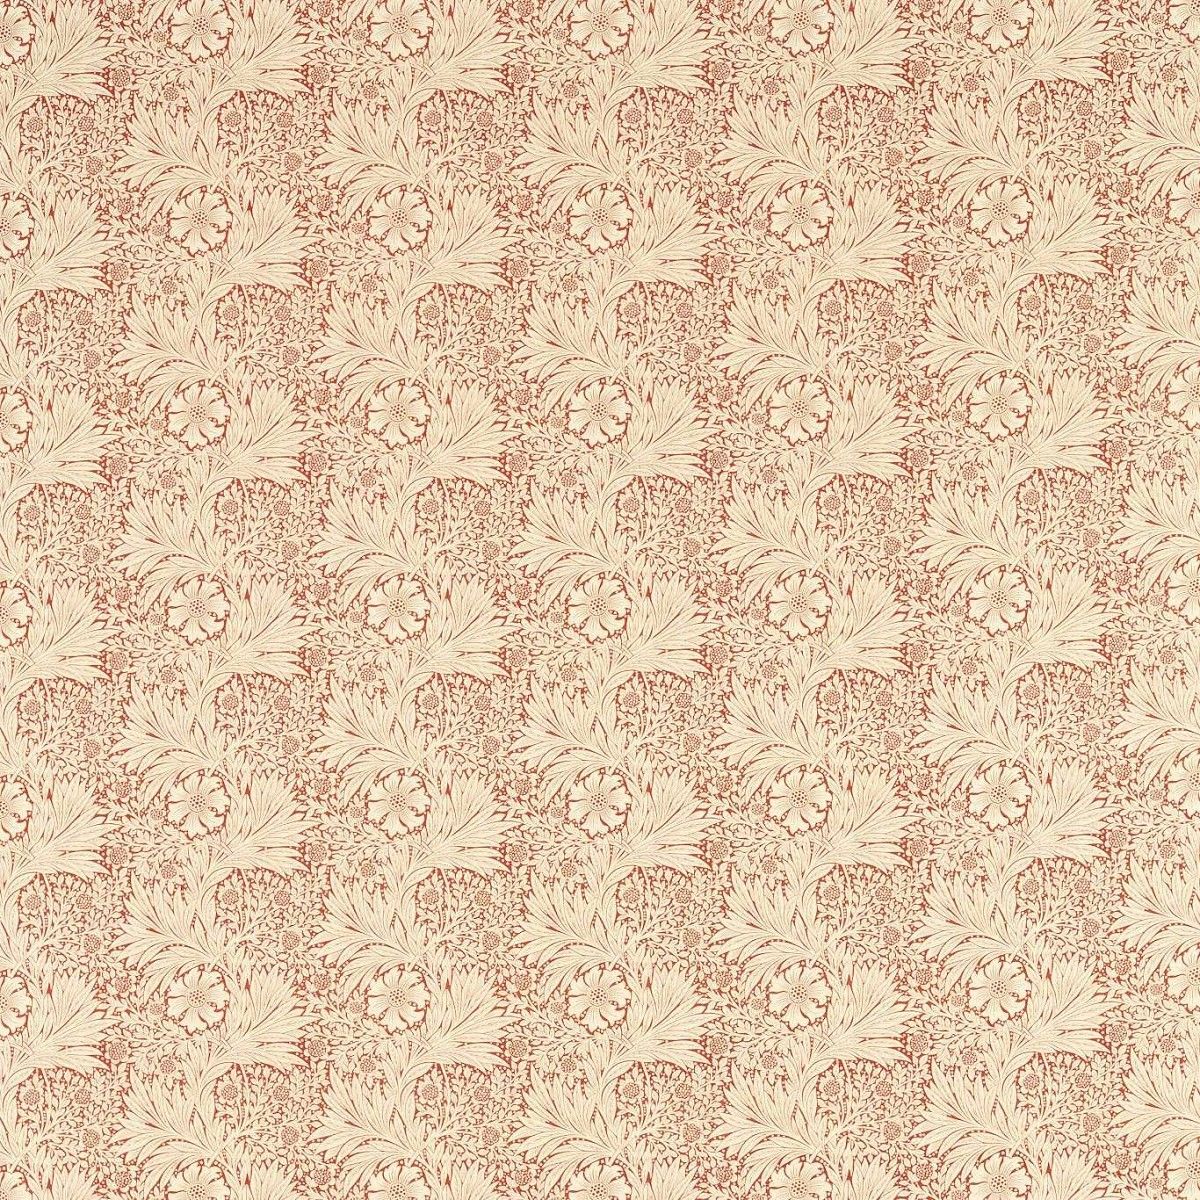 Marigold Outdoor Russet Fabric by William Morris & Co.